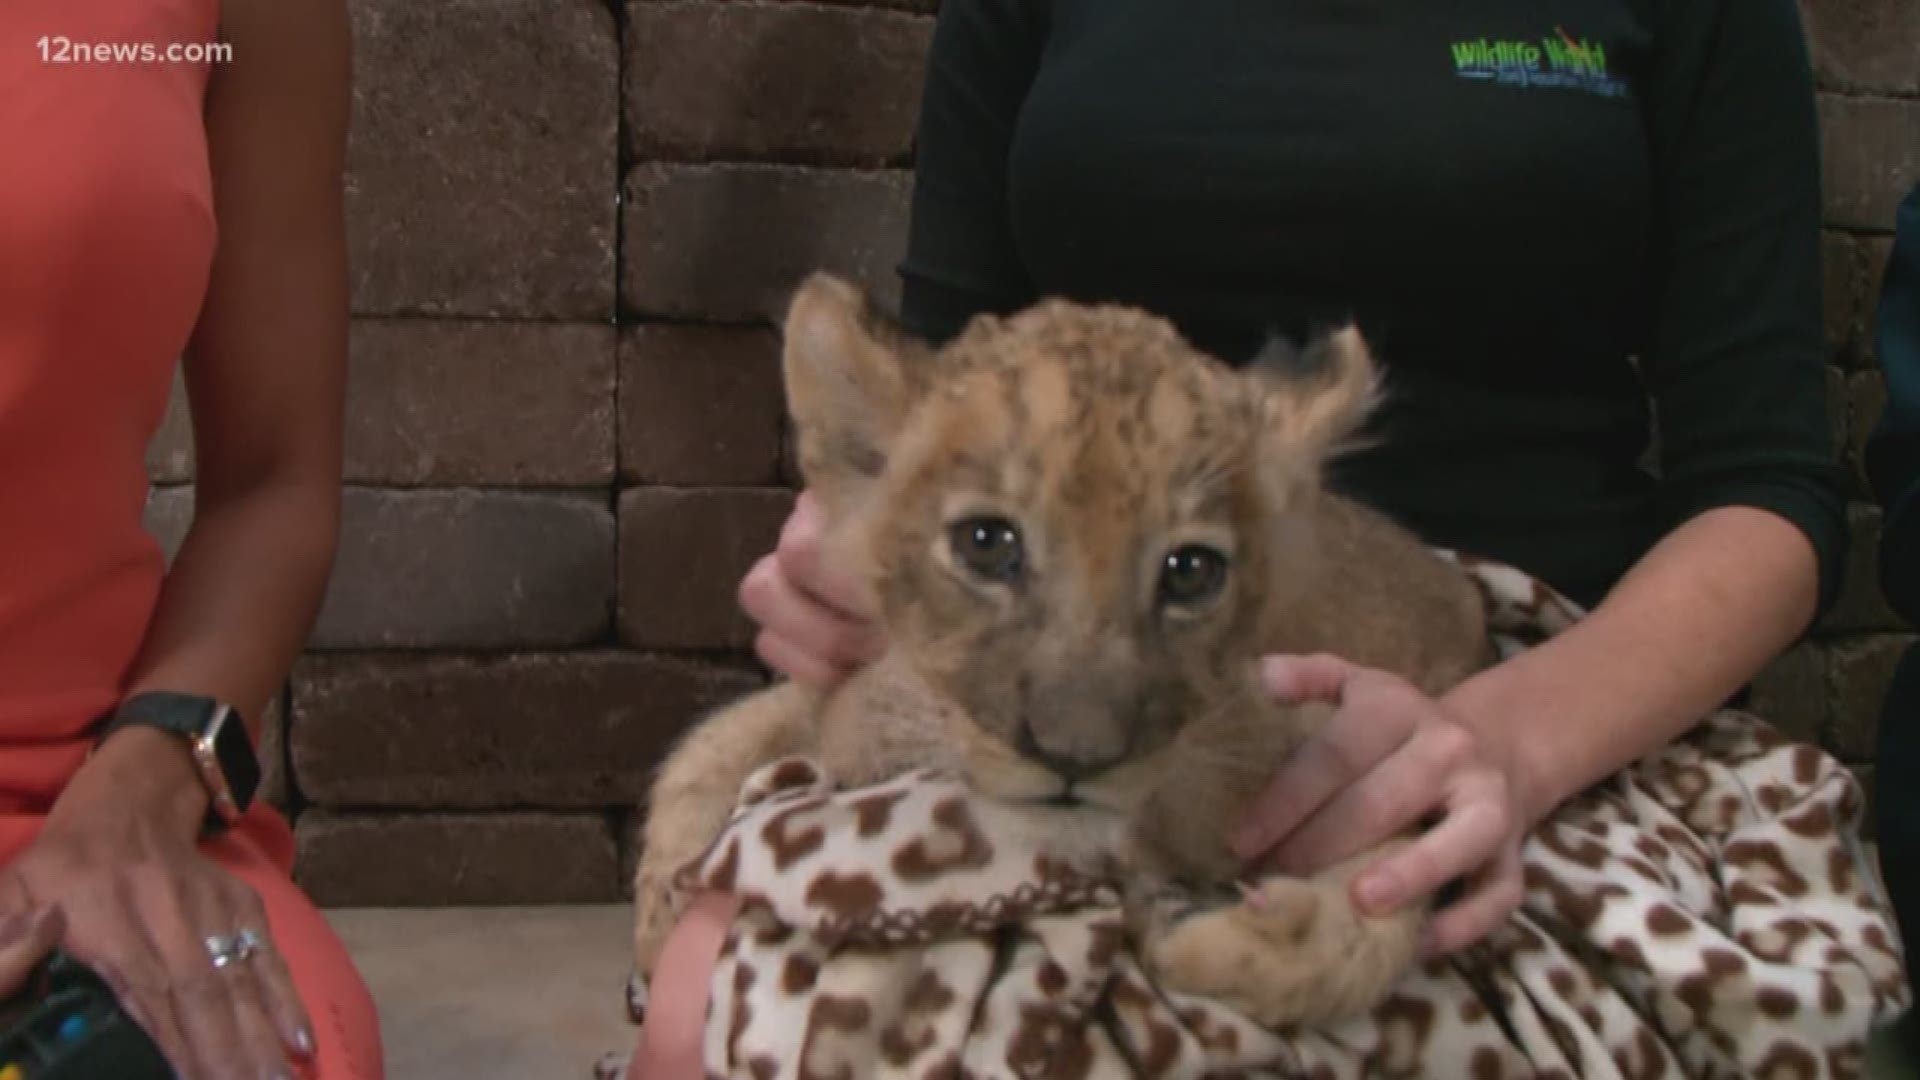 A new king has been born in the Valley! Meet Simba, the newest lion cub to be born at Wildlife World Zoo, Aquarium and Safari Park.